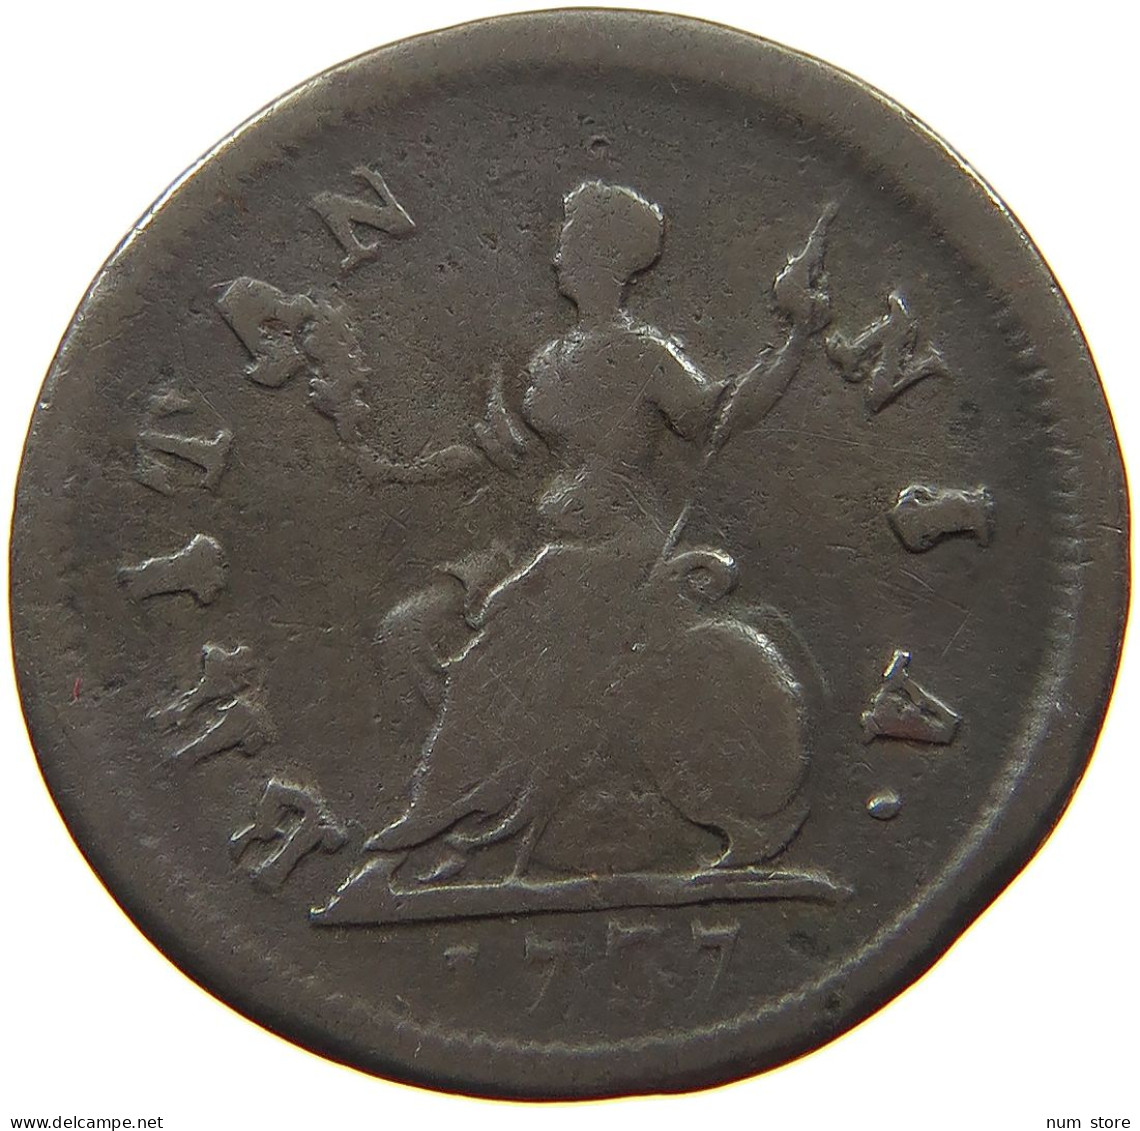 GREAT BRITAIN FARTHING 1737 George II. 1727-1760. #t149 0205 - A. 1 Farthing